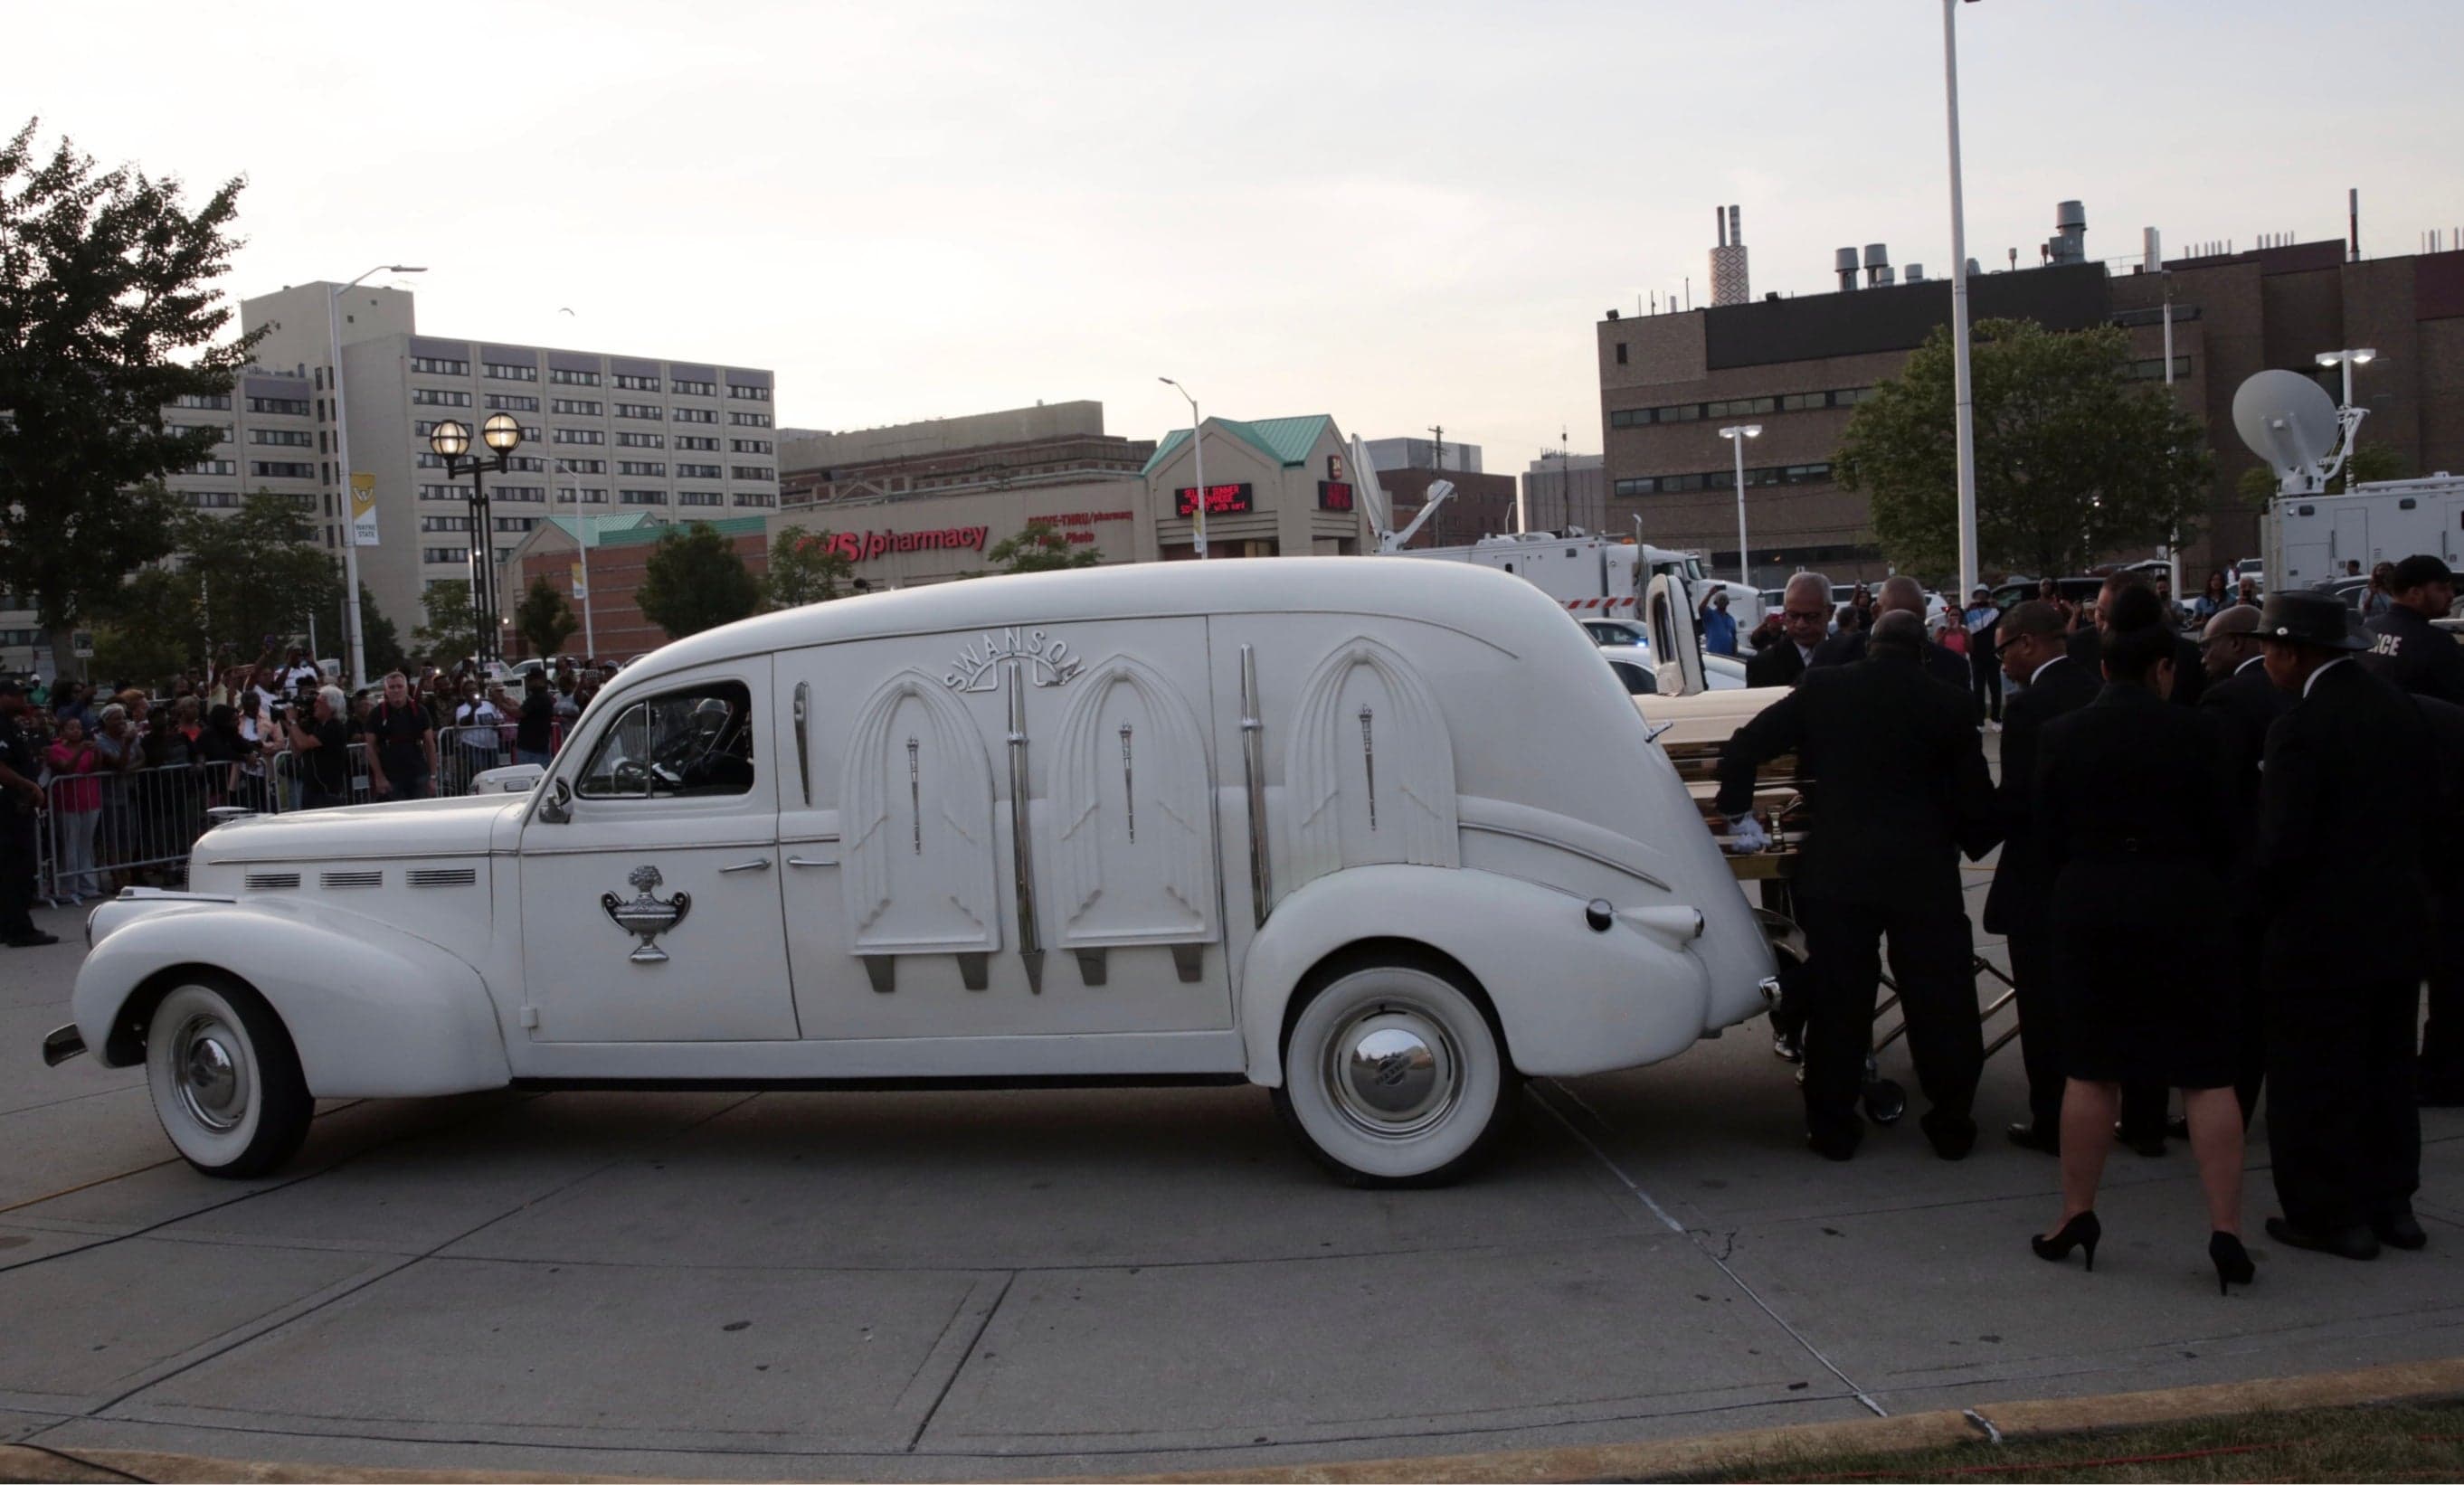 1940 LaSalle Hearse Carries Aretha Franklin’s Body in Detroit for Final Farewell Tour